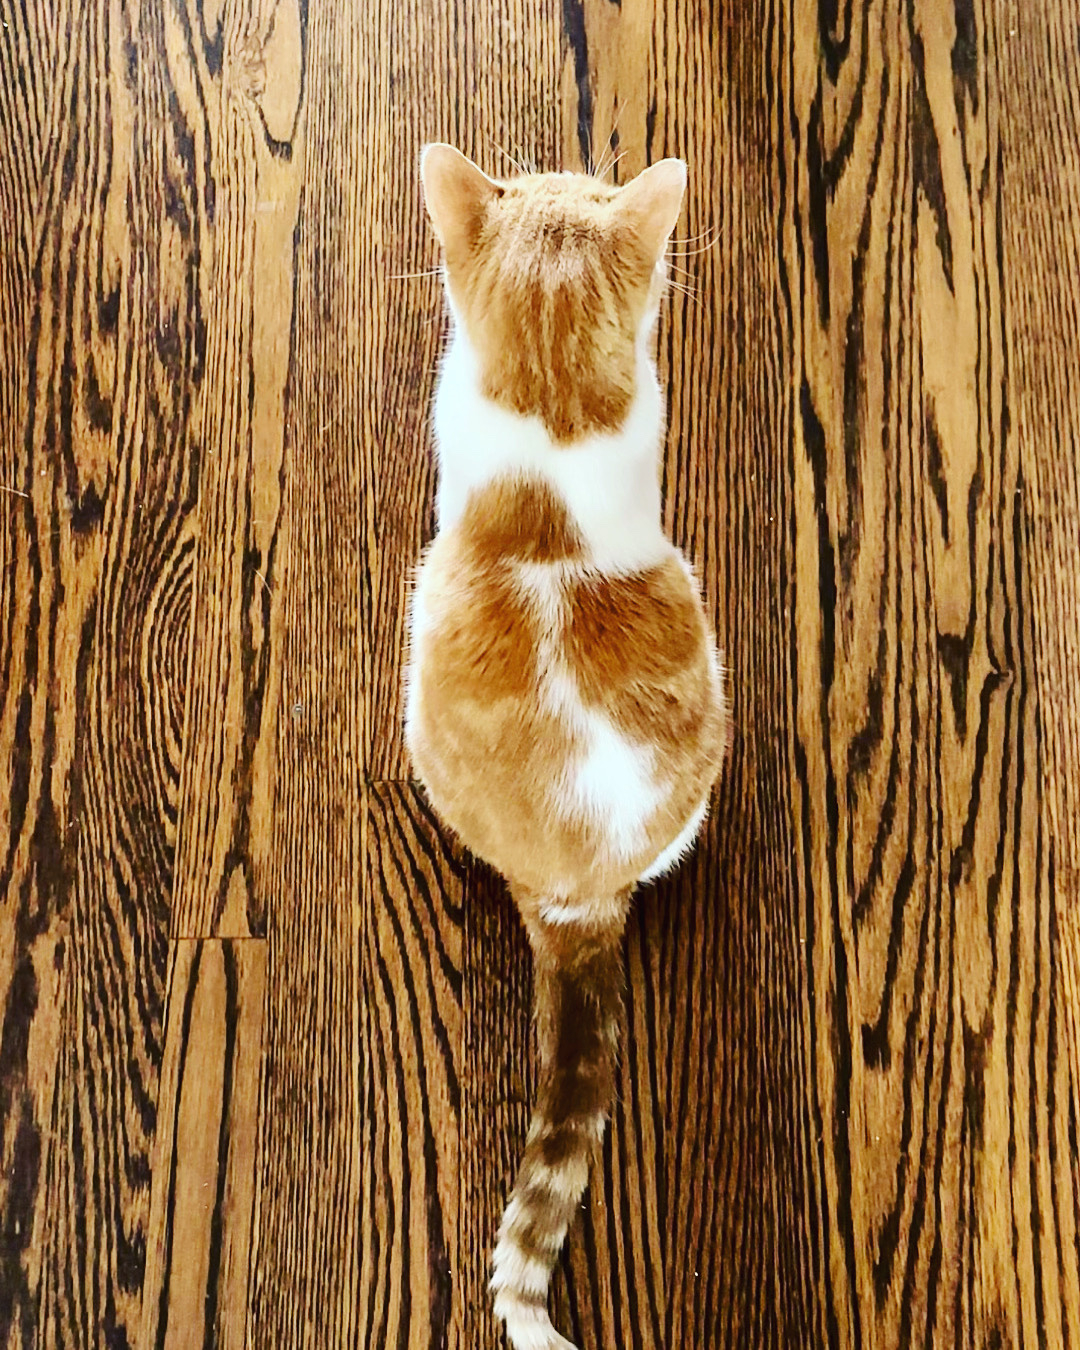 An orange and white cat against a hardwood floor 